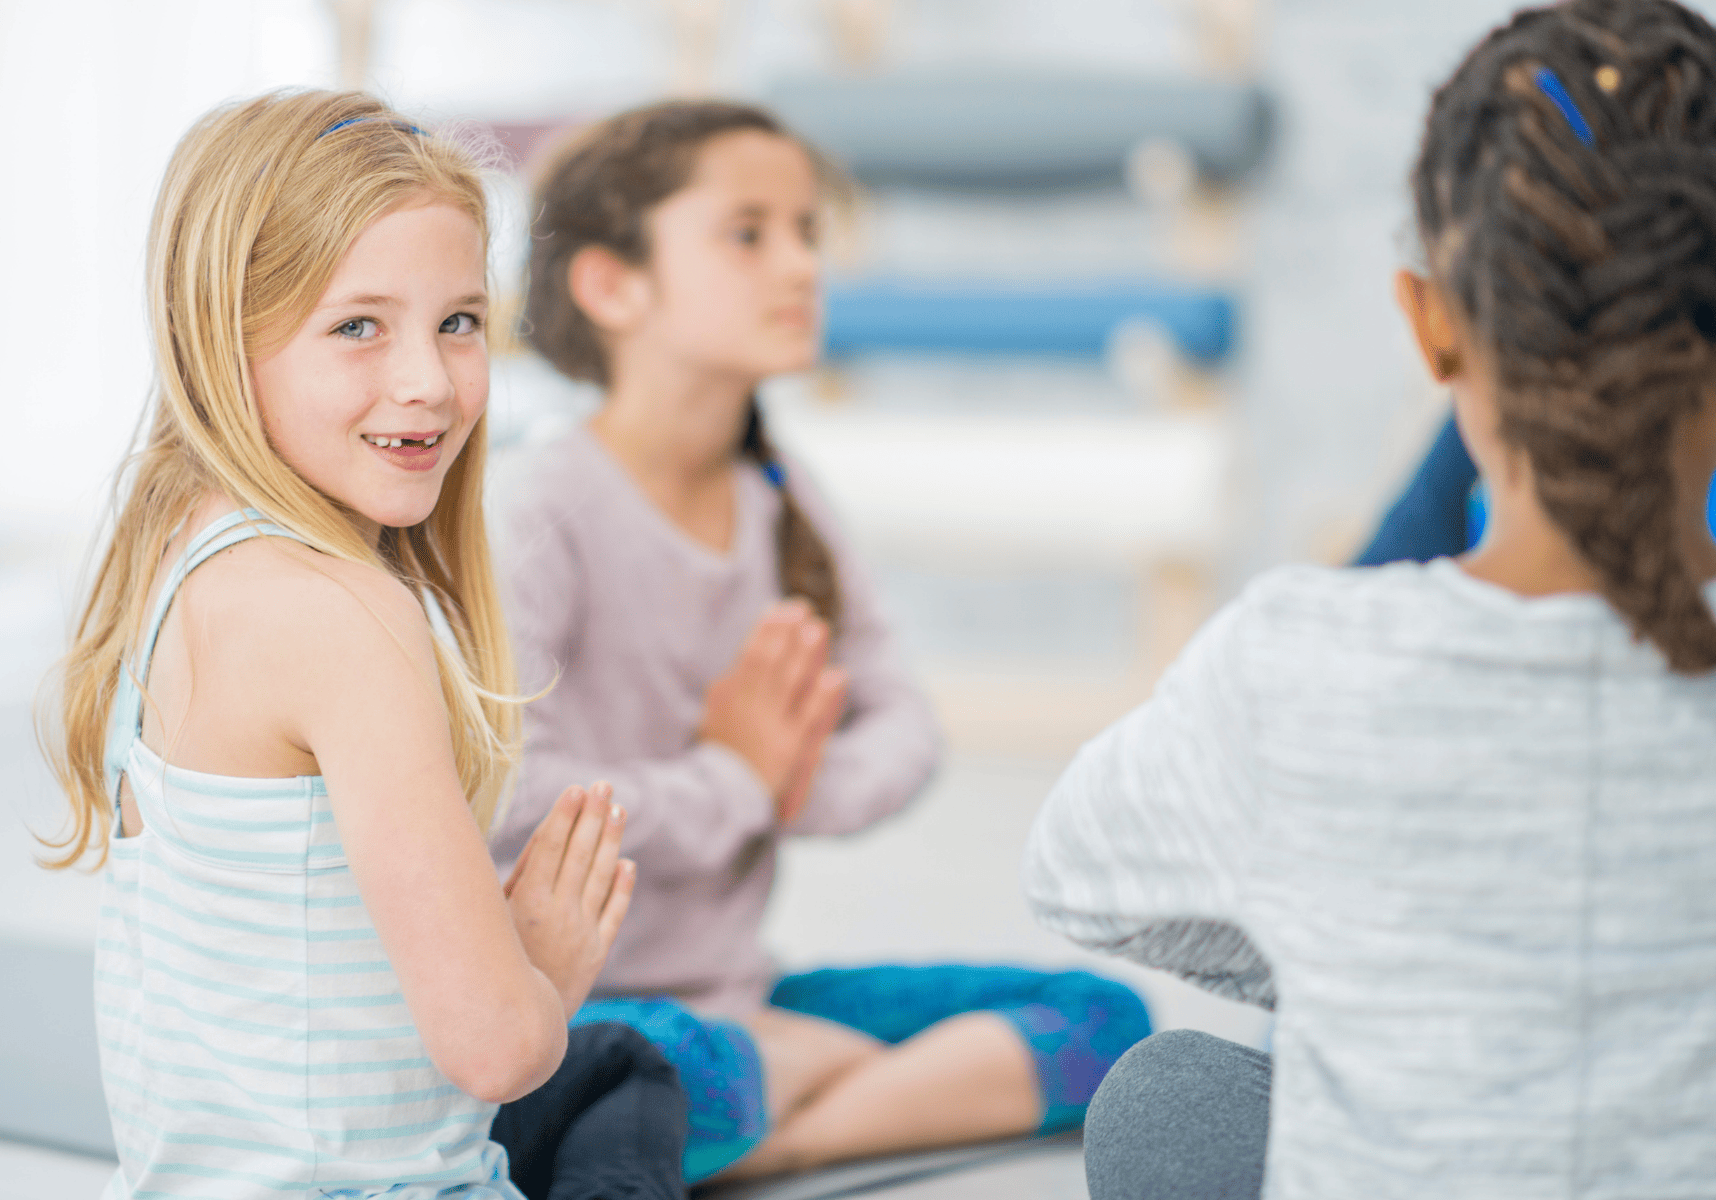 Should Yoga be Taught in schools?